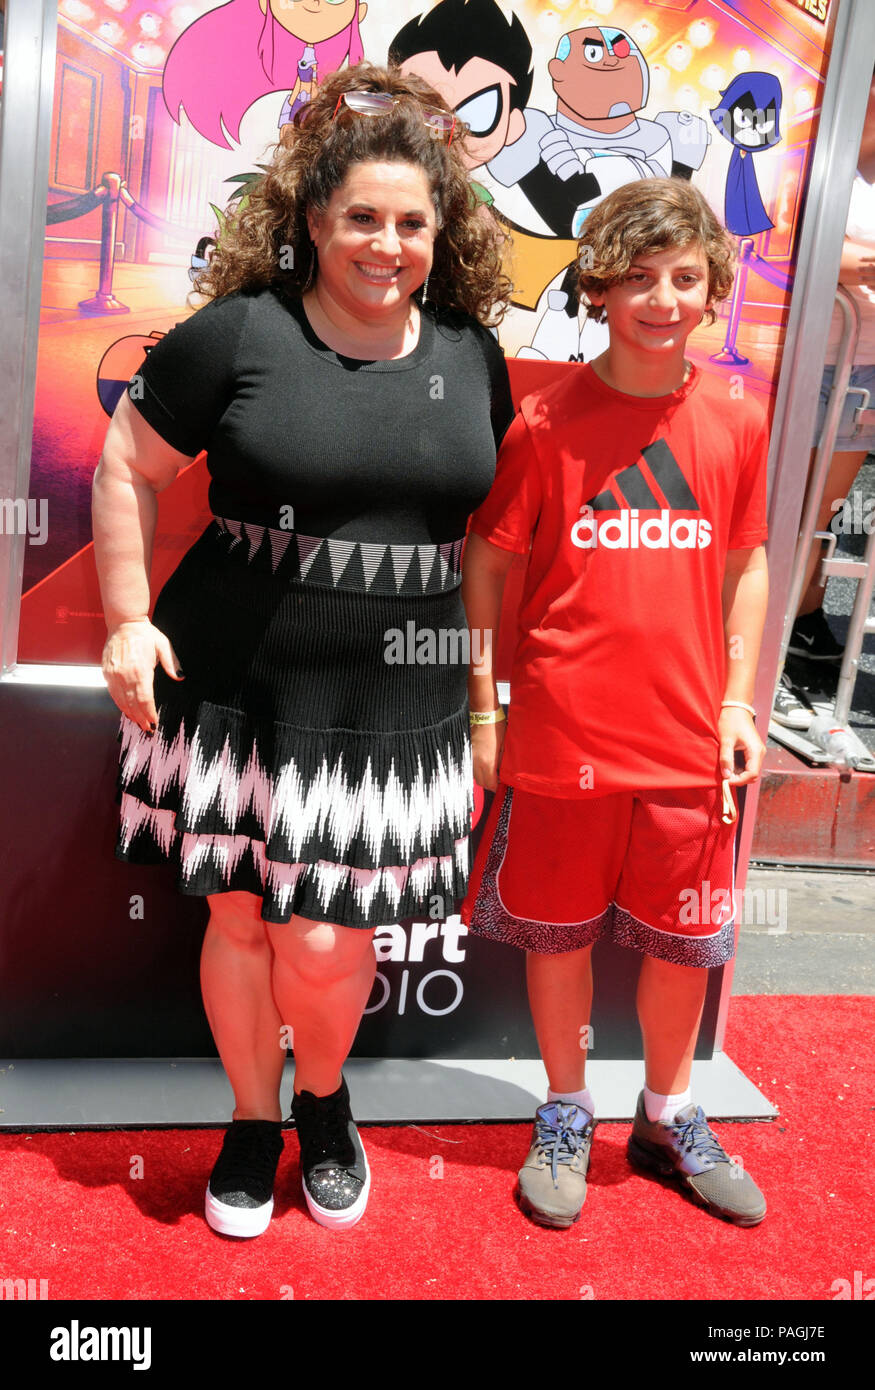 HOLLYWOOD, CA - JULY 22: Actress Marissa Jaret WInokur and son Zev Isaac Miller attend Warner Bros. Pictures' World Premiere of 'Teen Titans Go! At The Movies' on July 22, 2018 at TCL Chinese Theatre in Hollywood, California. Photo by Barry King/Alamy Live News Stock Photo